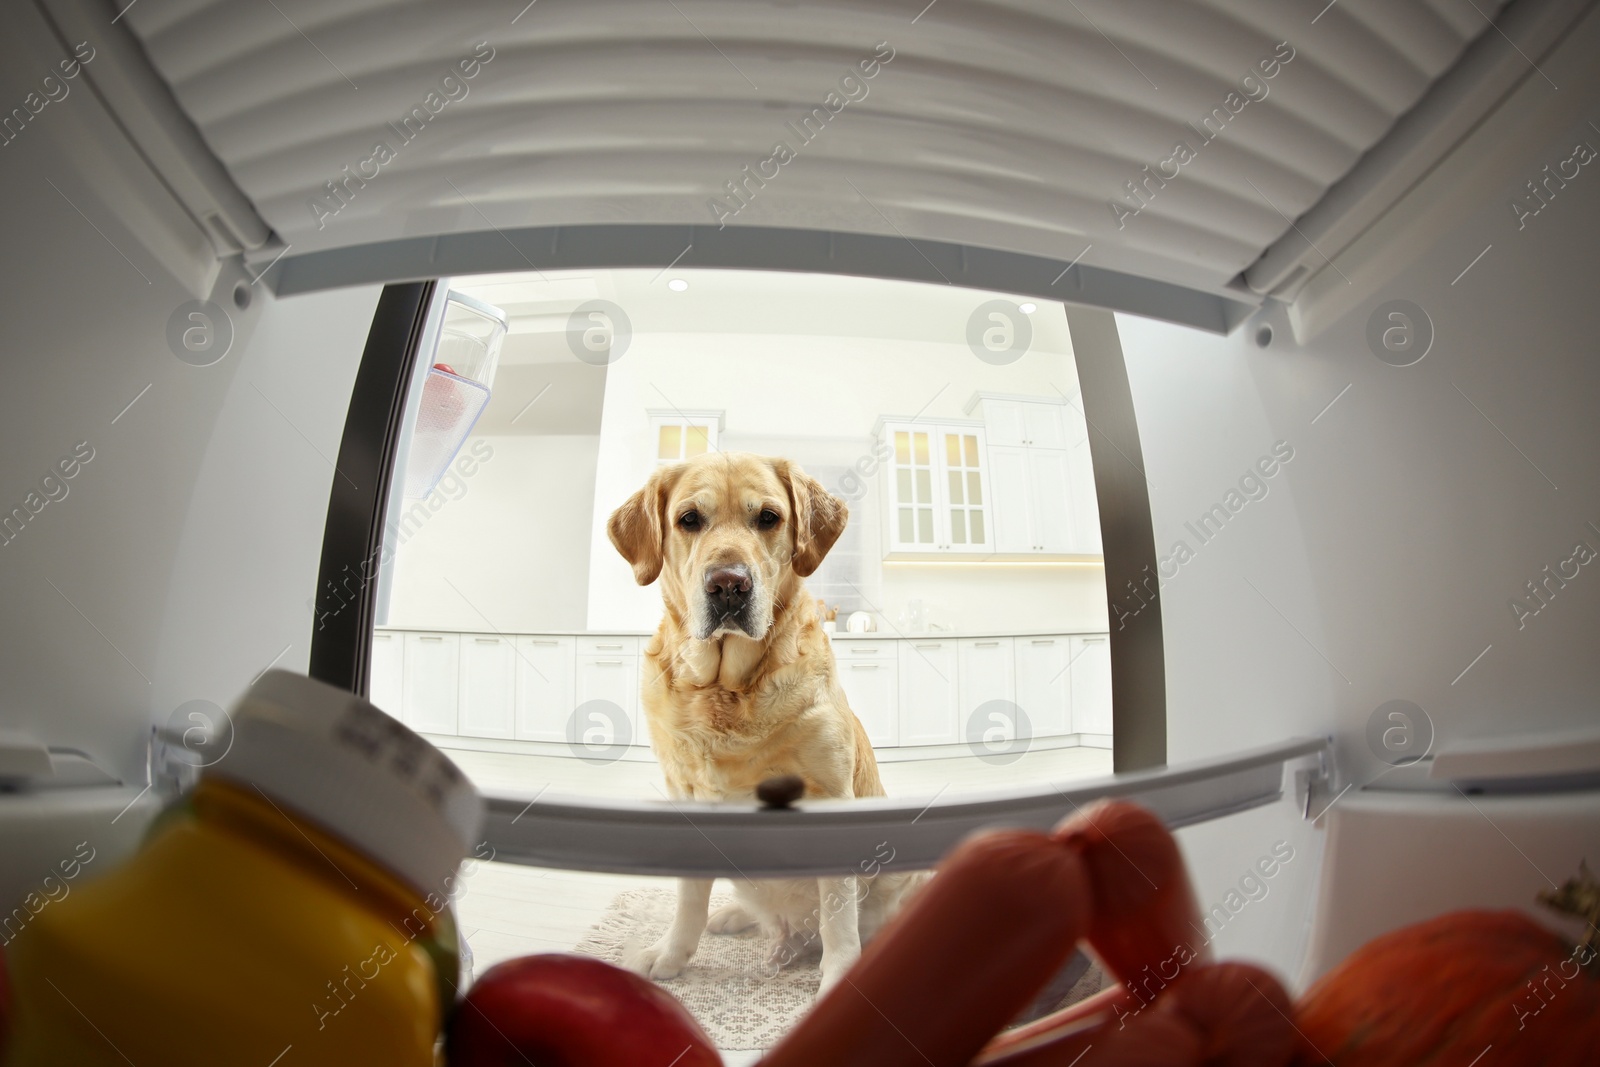 Photo of Cute Labrador Retriever seeking for food in refrigerator at home, view from inside